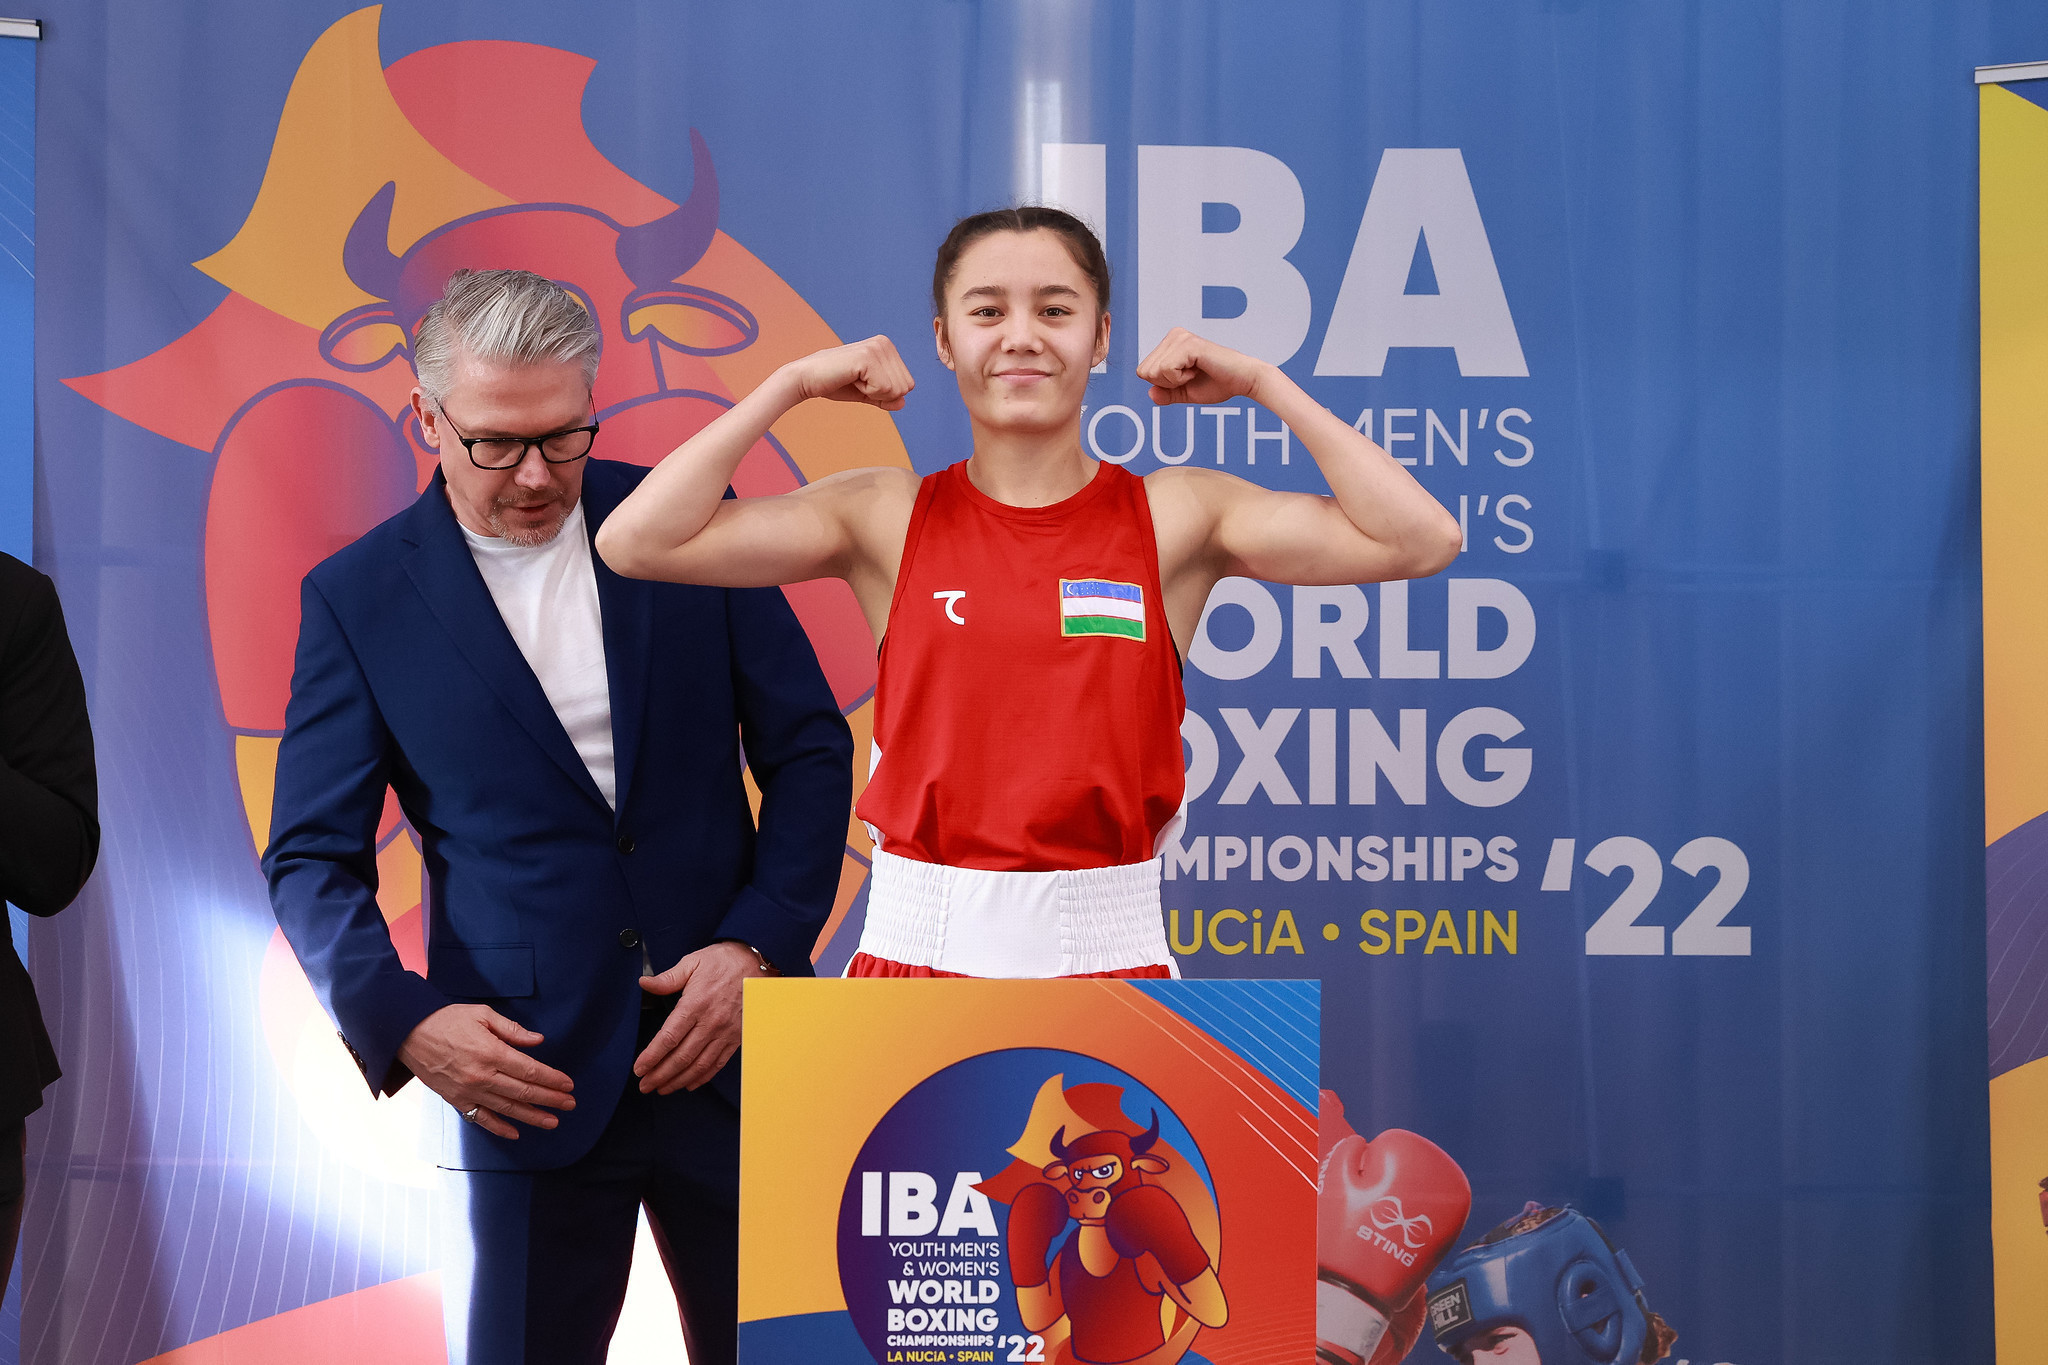 The Youth World Championships last took place in La Nucía in Spain in 2022, where Uzbekistan topped the medal table ©IBA